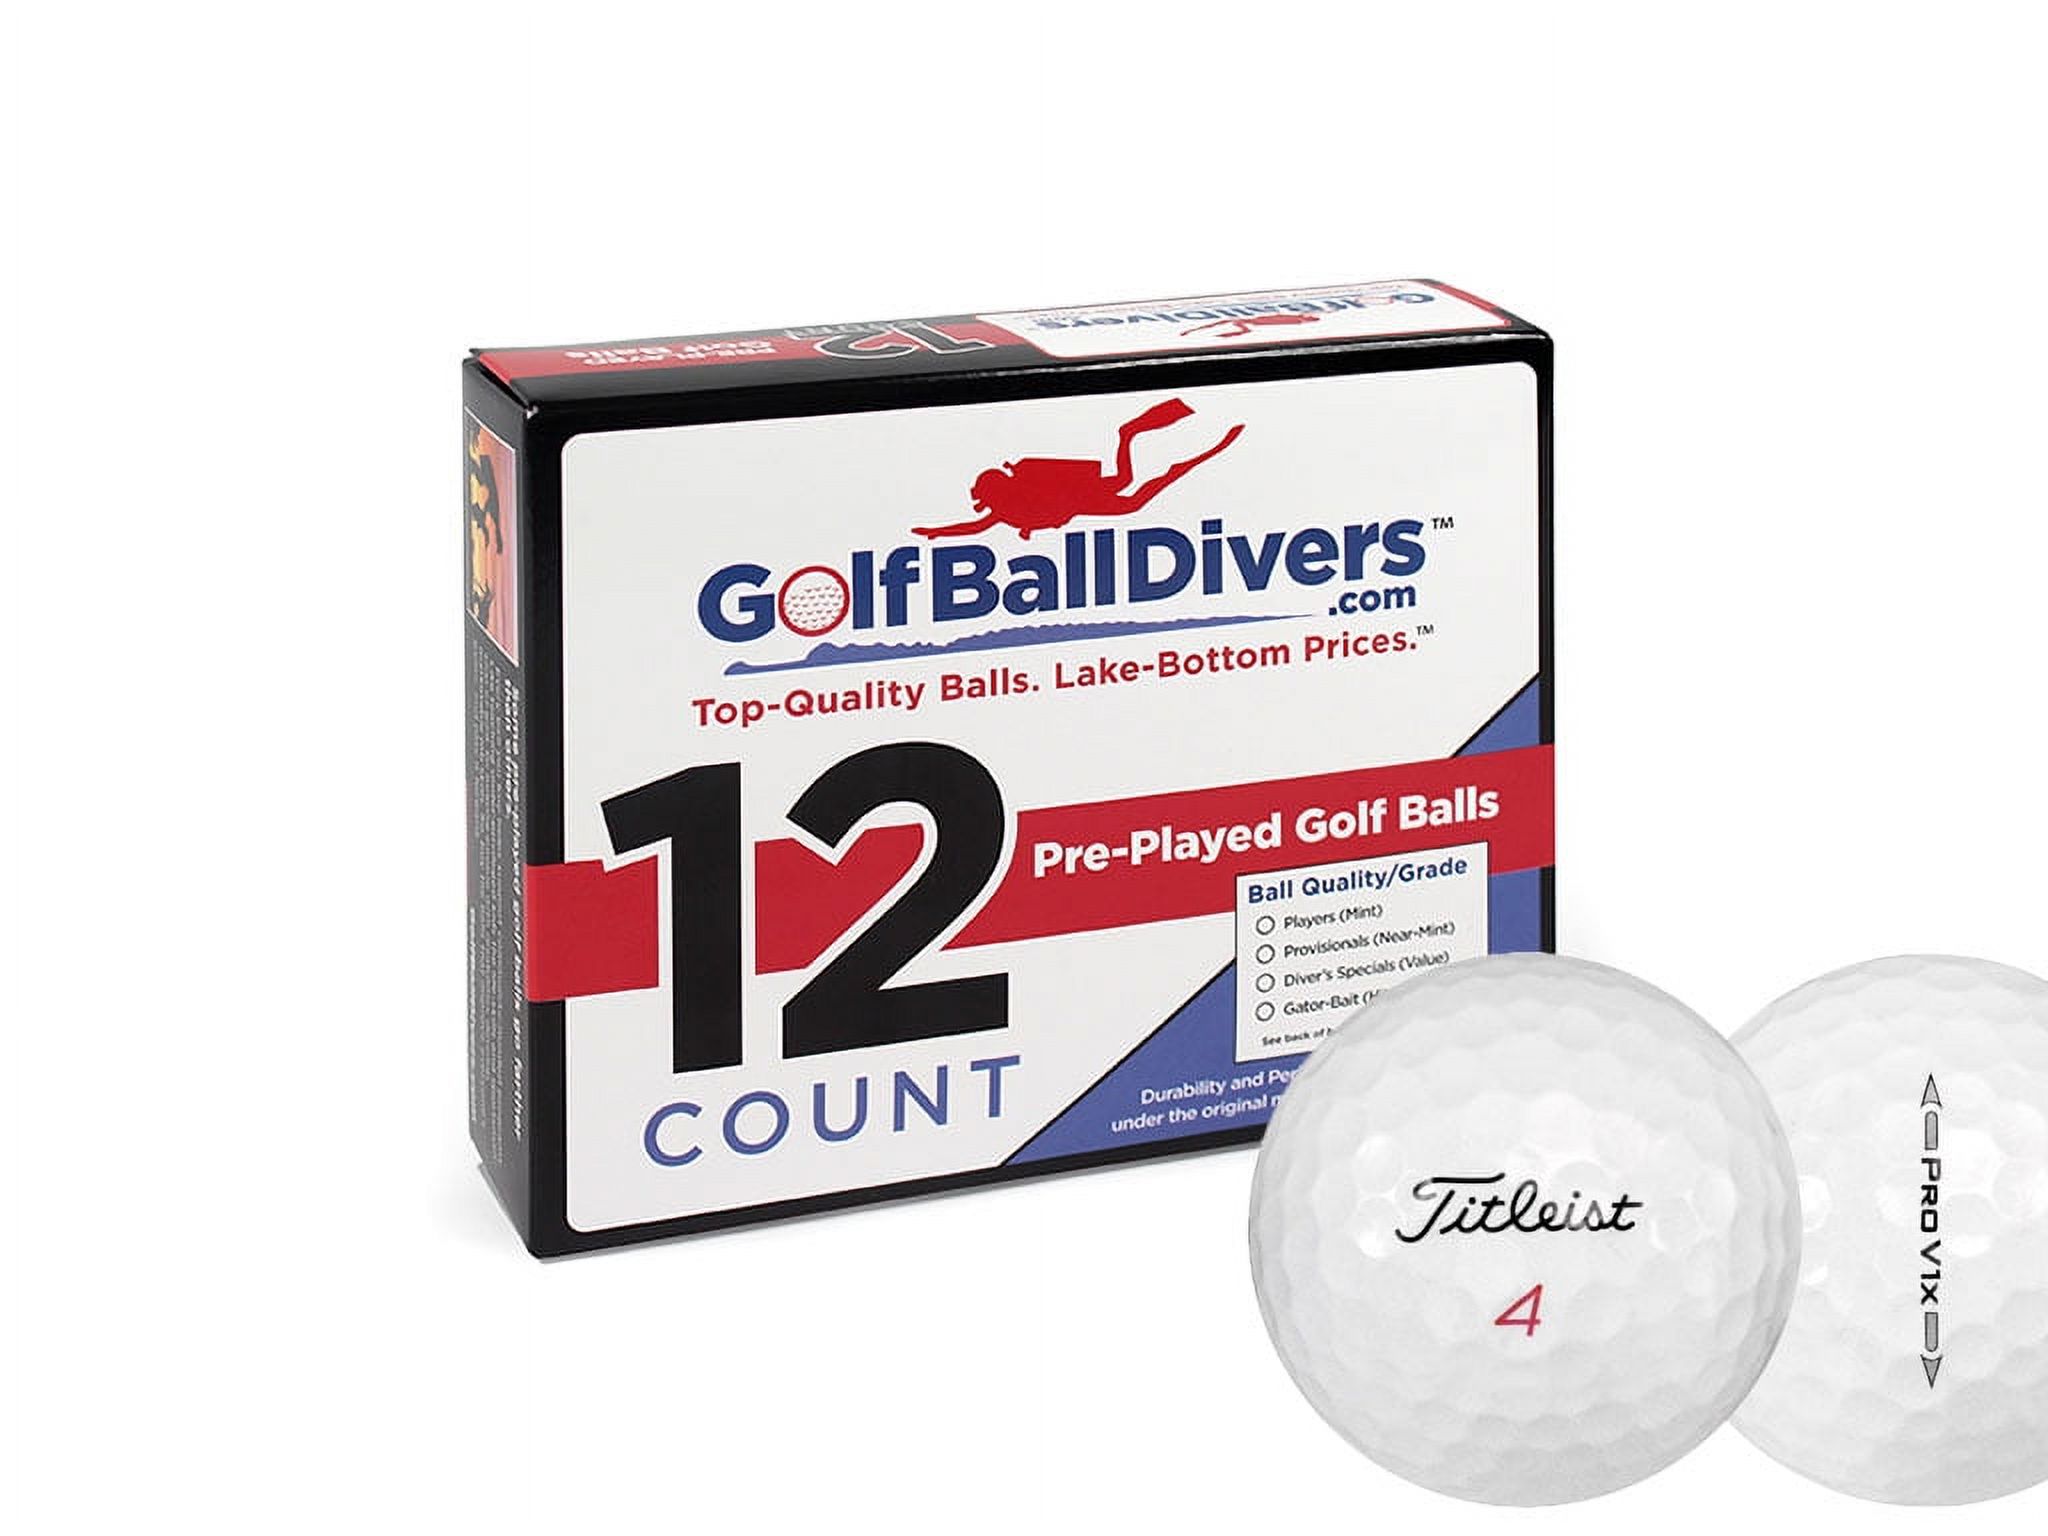 Titleist 2016 Pro V1x Golf Balls, Prior Generation, Used, Good Quality, 120 Pack - image 1 of 7